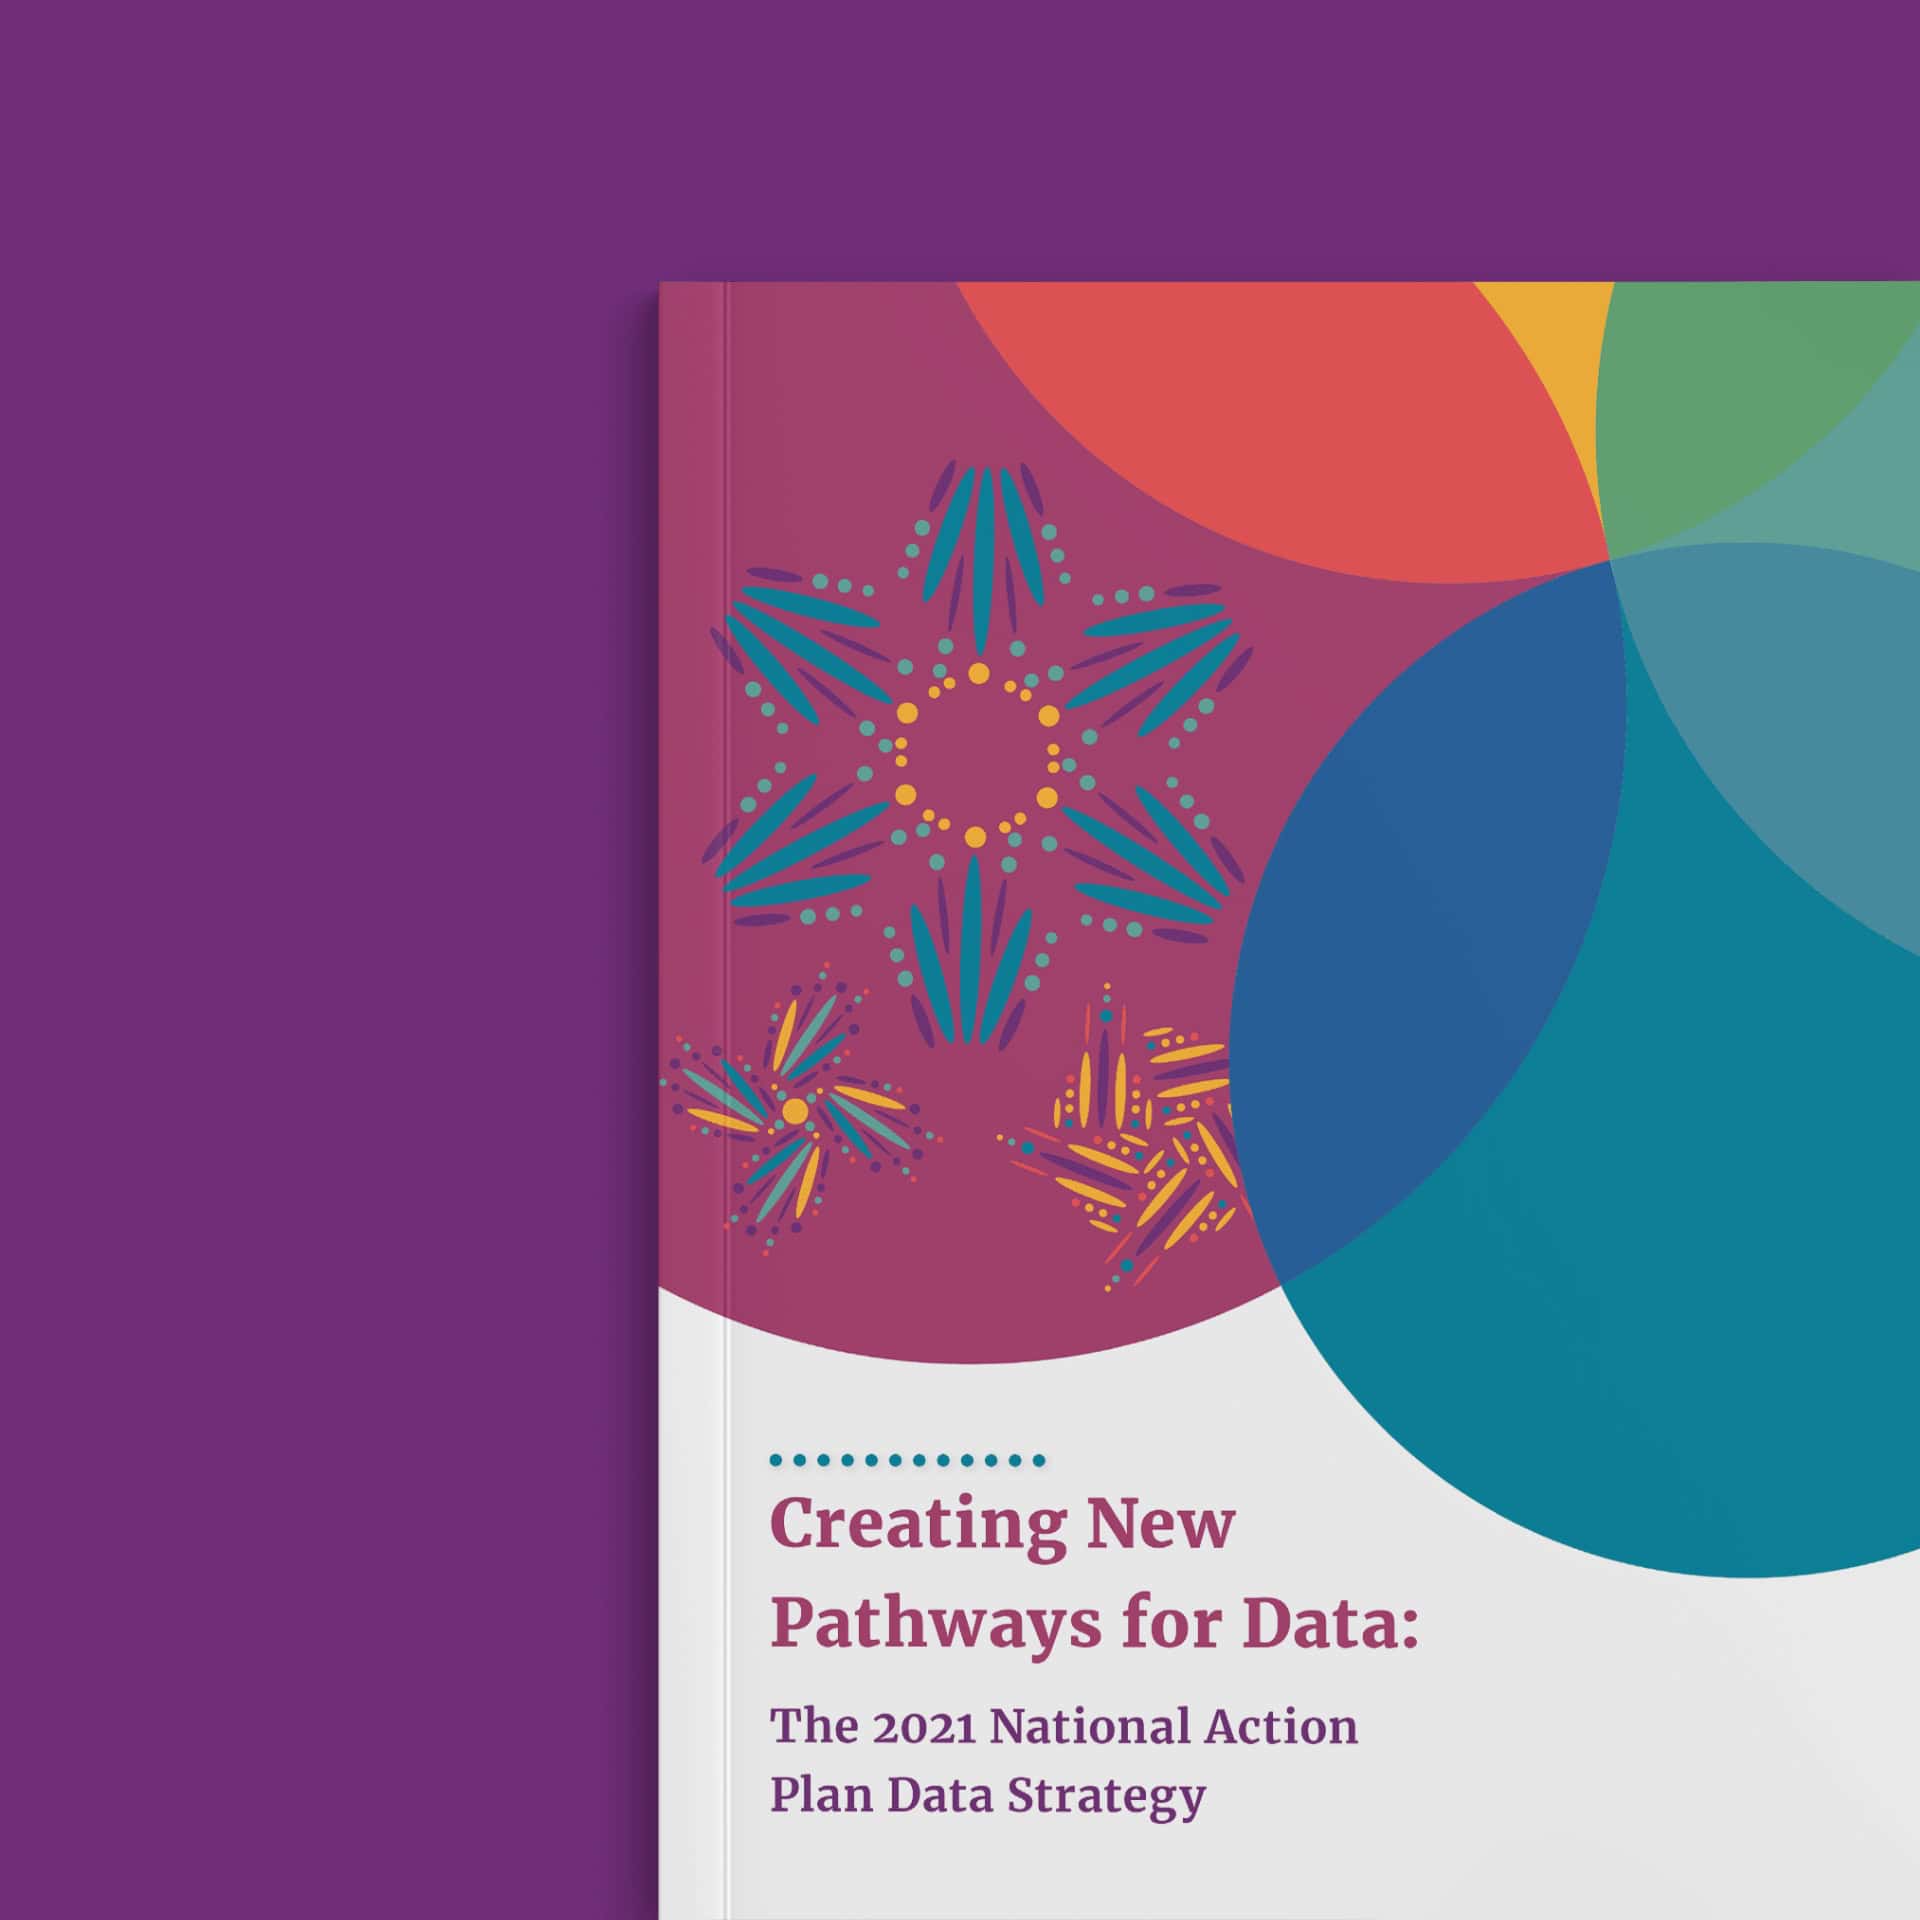 The cover for the Creating New Pathways for Data: The 2021 National Action Plan Data Strategy booklet. The cover features several circles intersecting each other with a beadwork-like pattern consisting of circles and ovals.